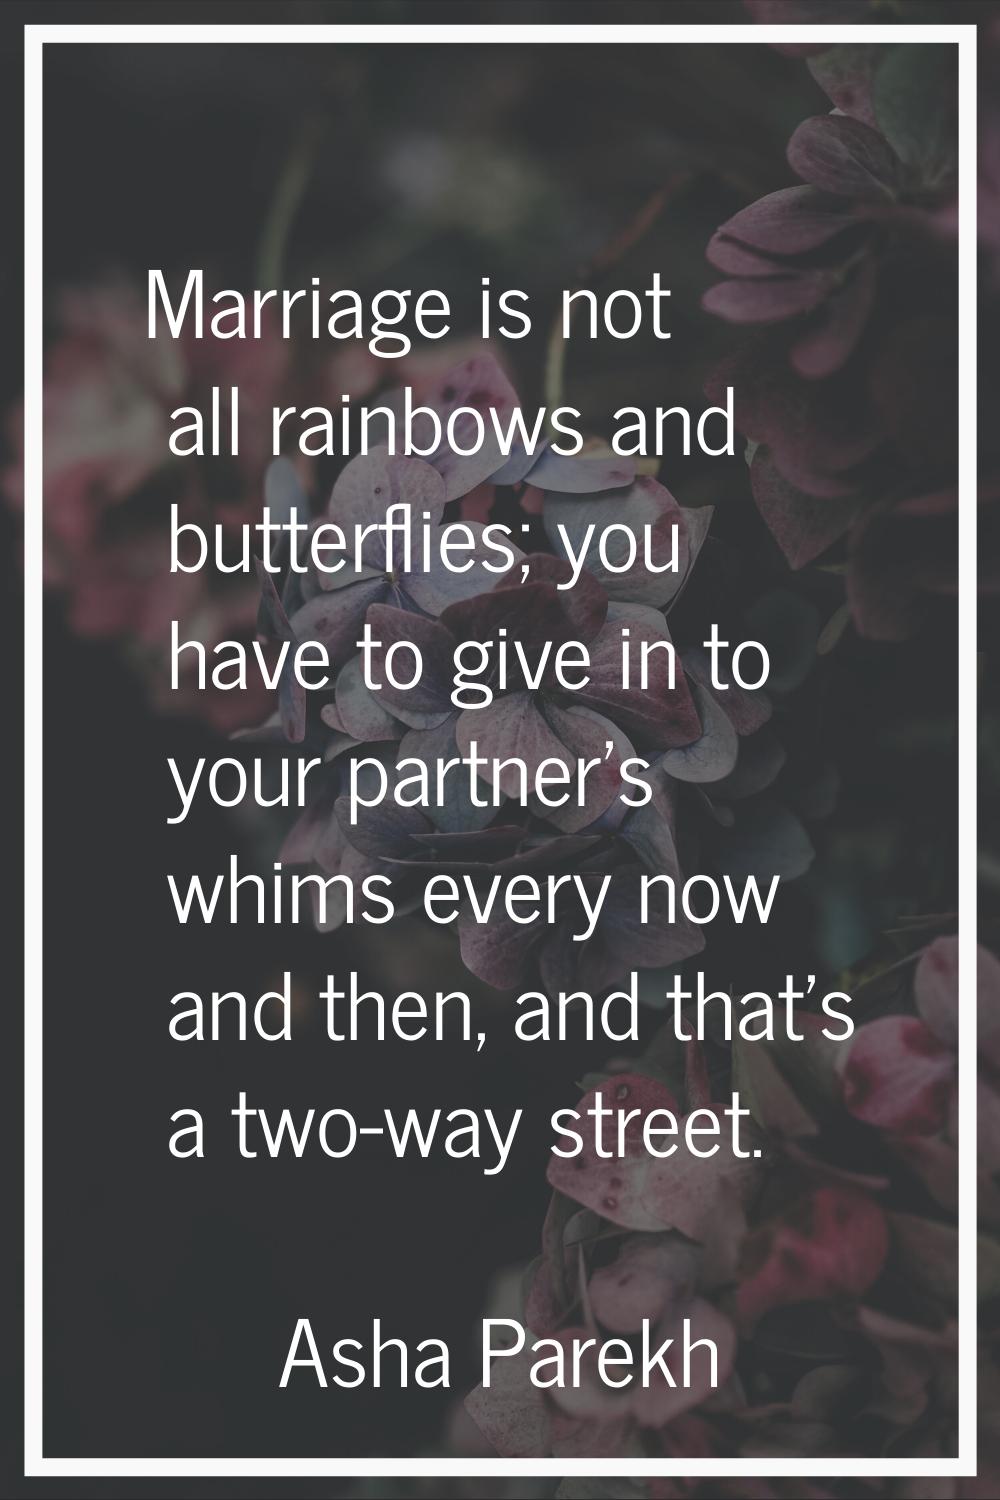 Marriage is not all rainbows and butterflies; you have to give in to your partner's whims every now